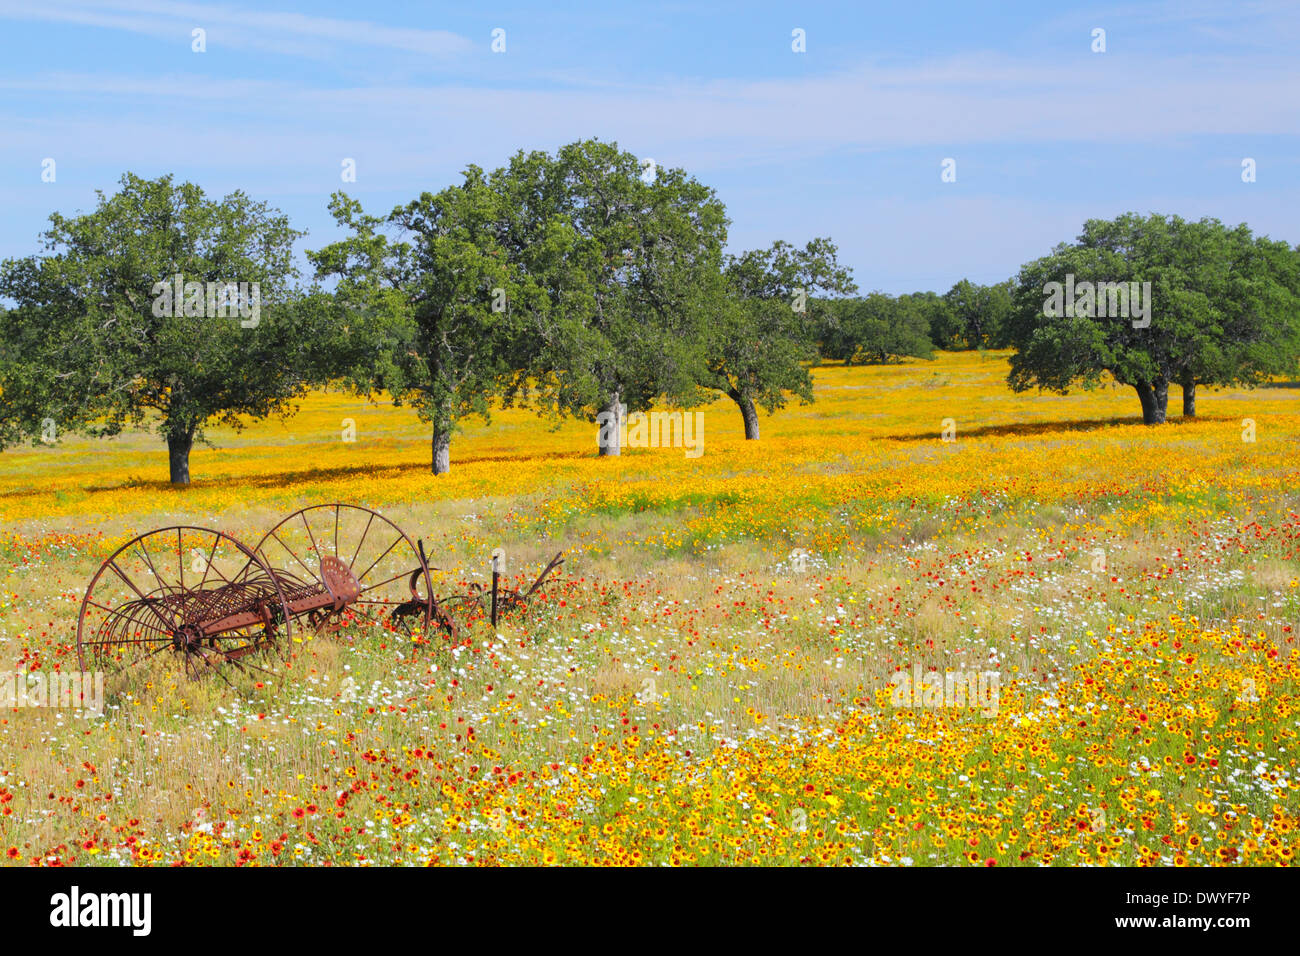 An old farm implement rests in a field of spring wildflowers in the Texas hill country. Stock Photo